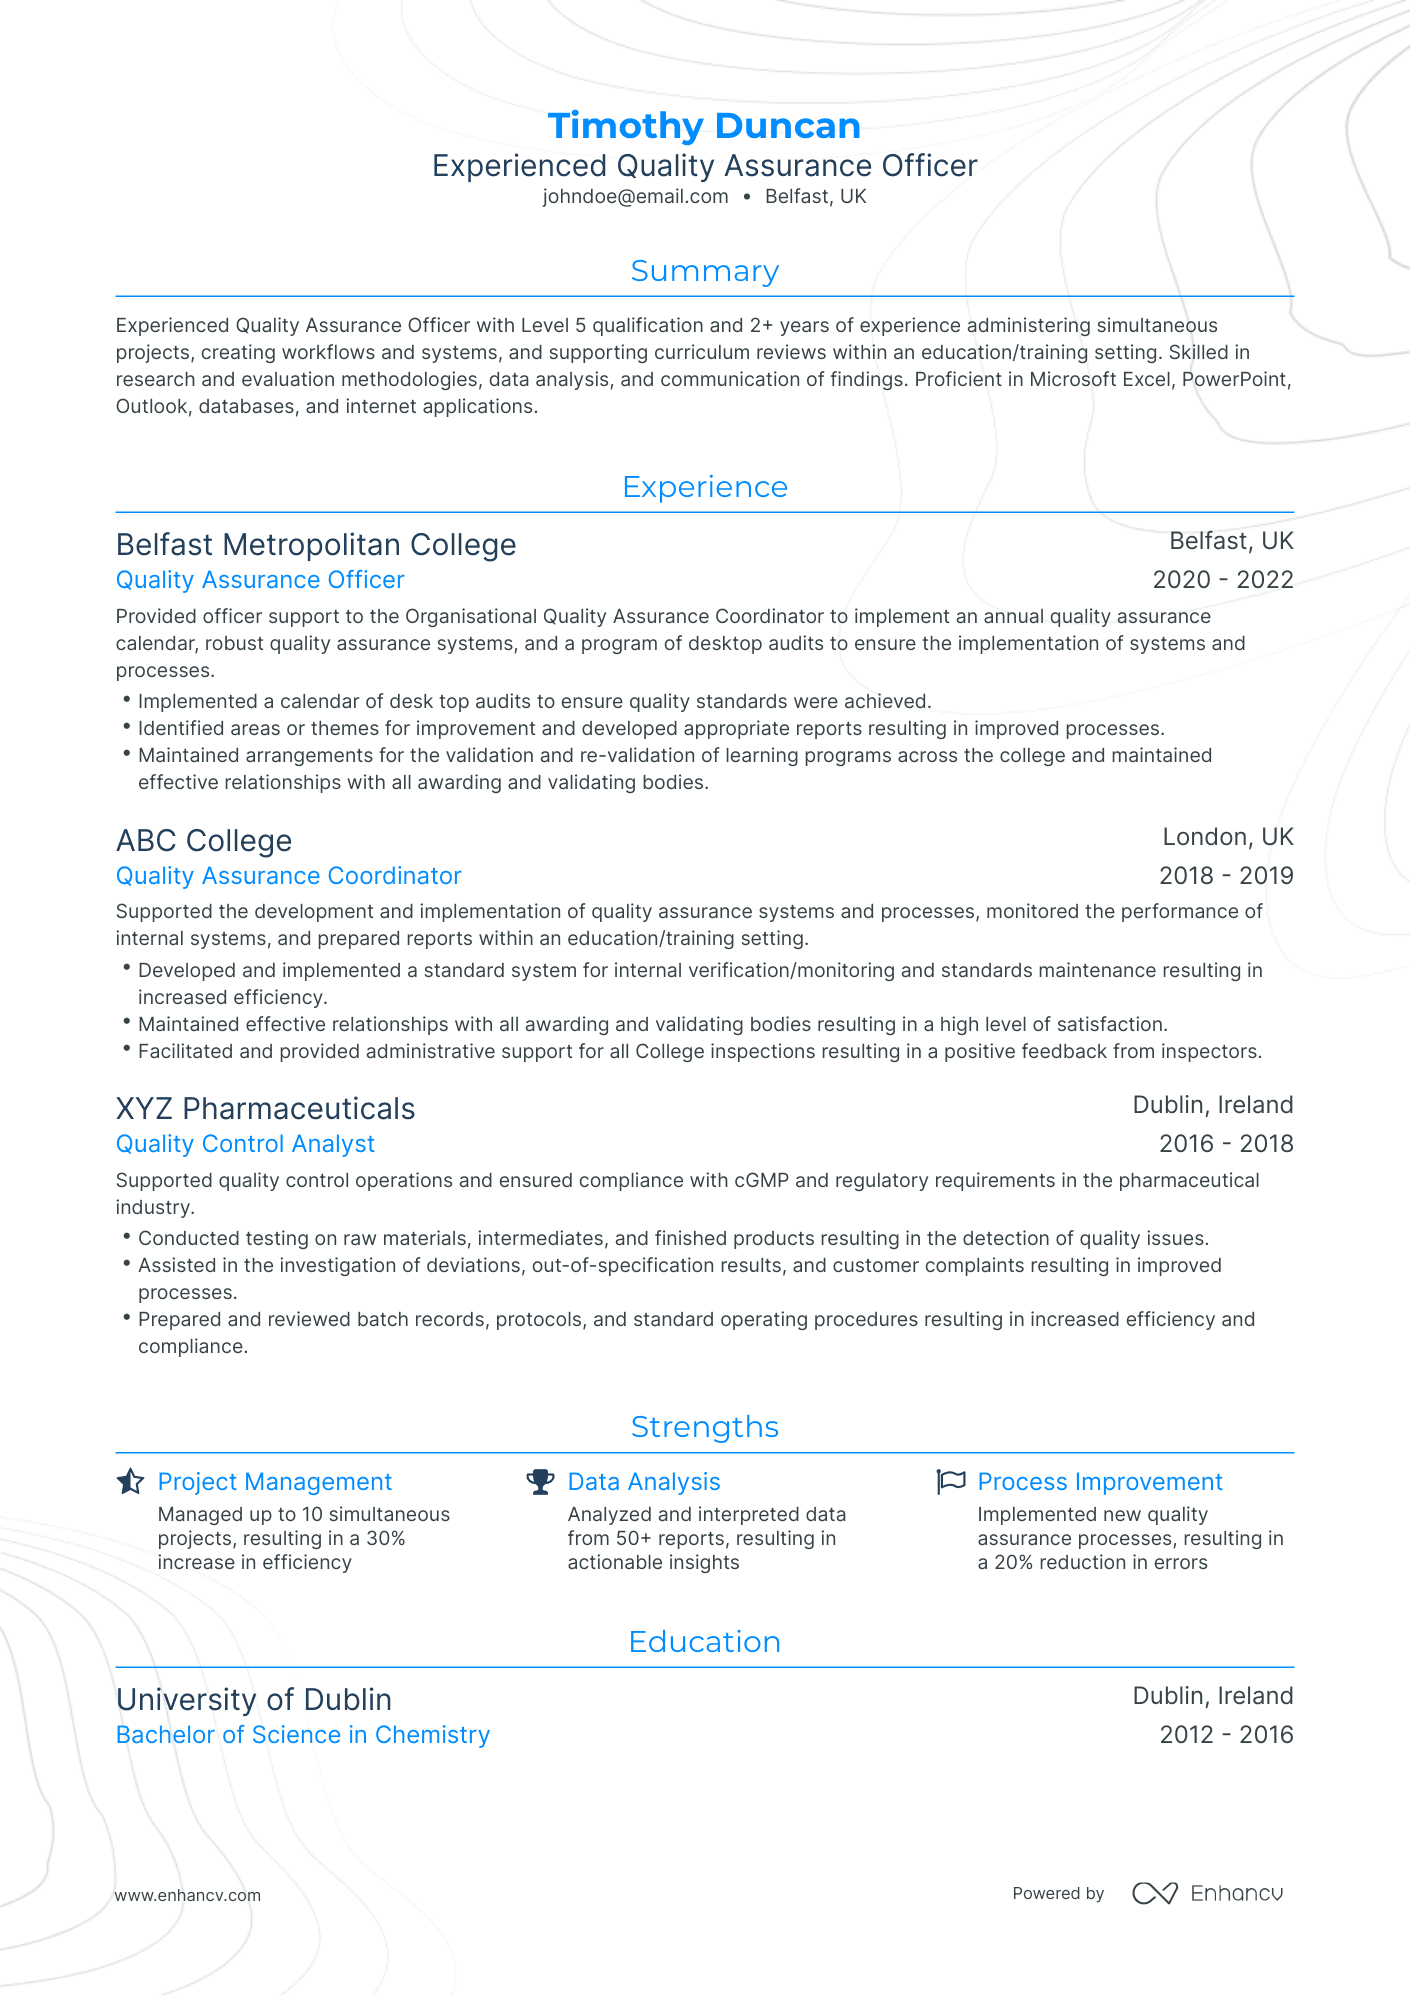 Traditional Quality Assurance Officer Resume Template